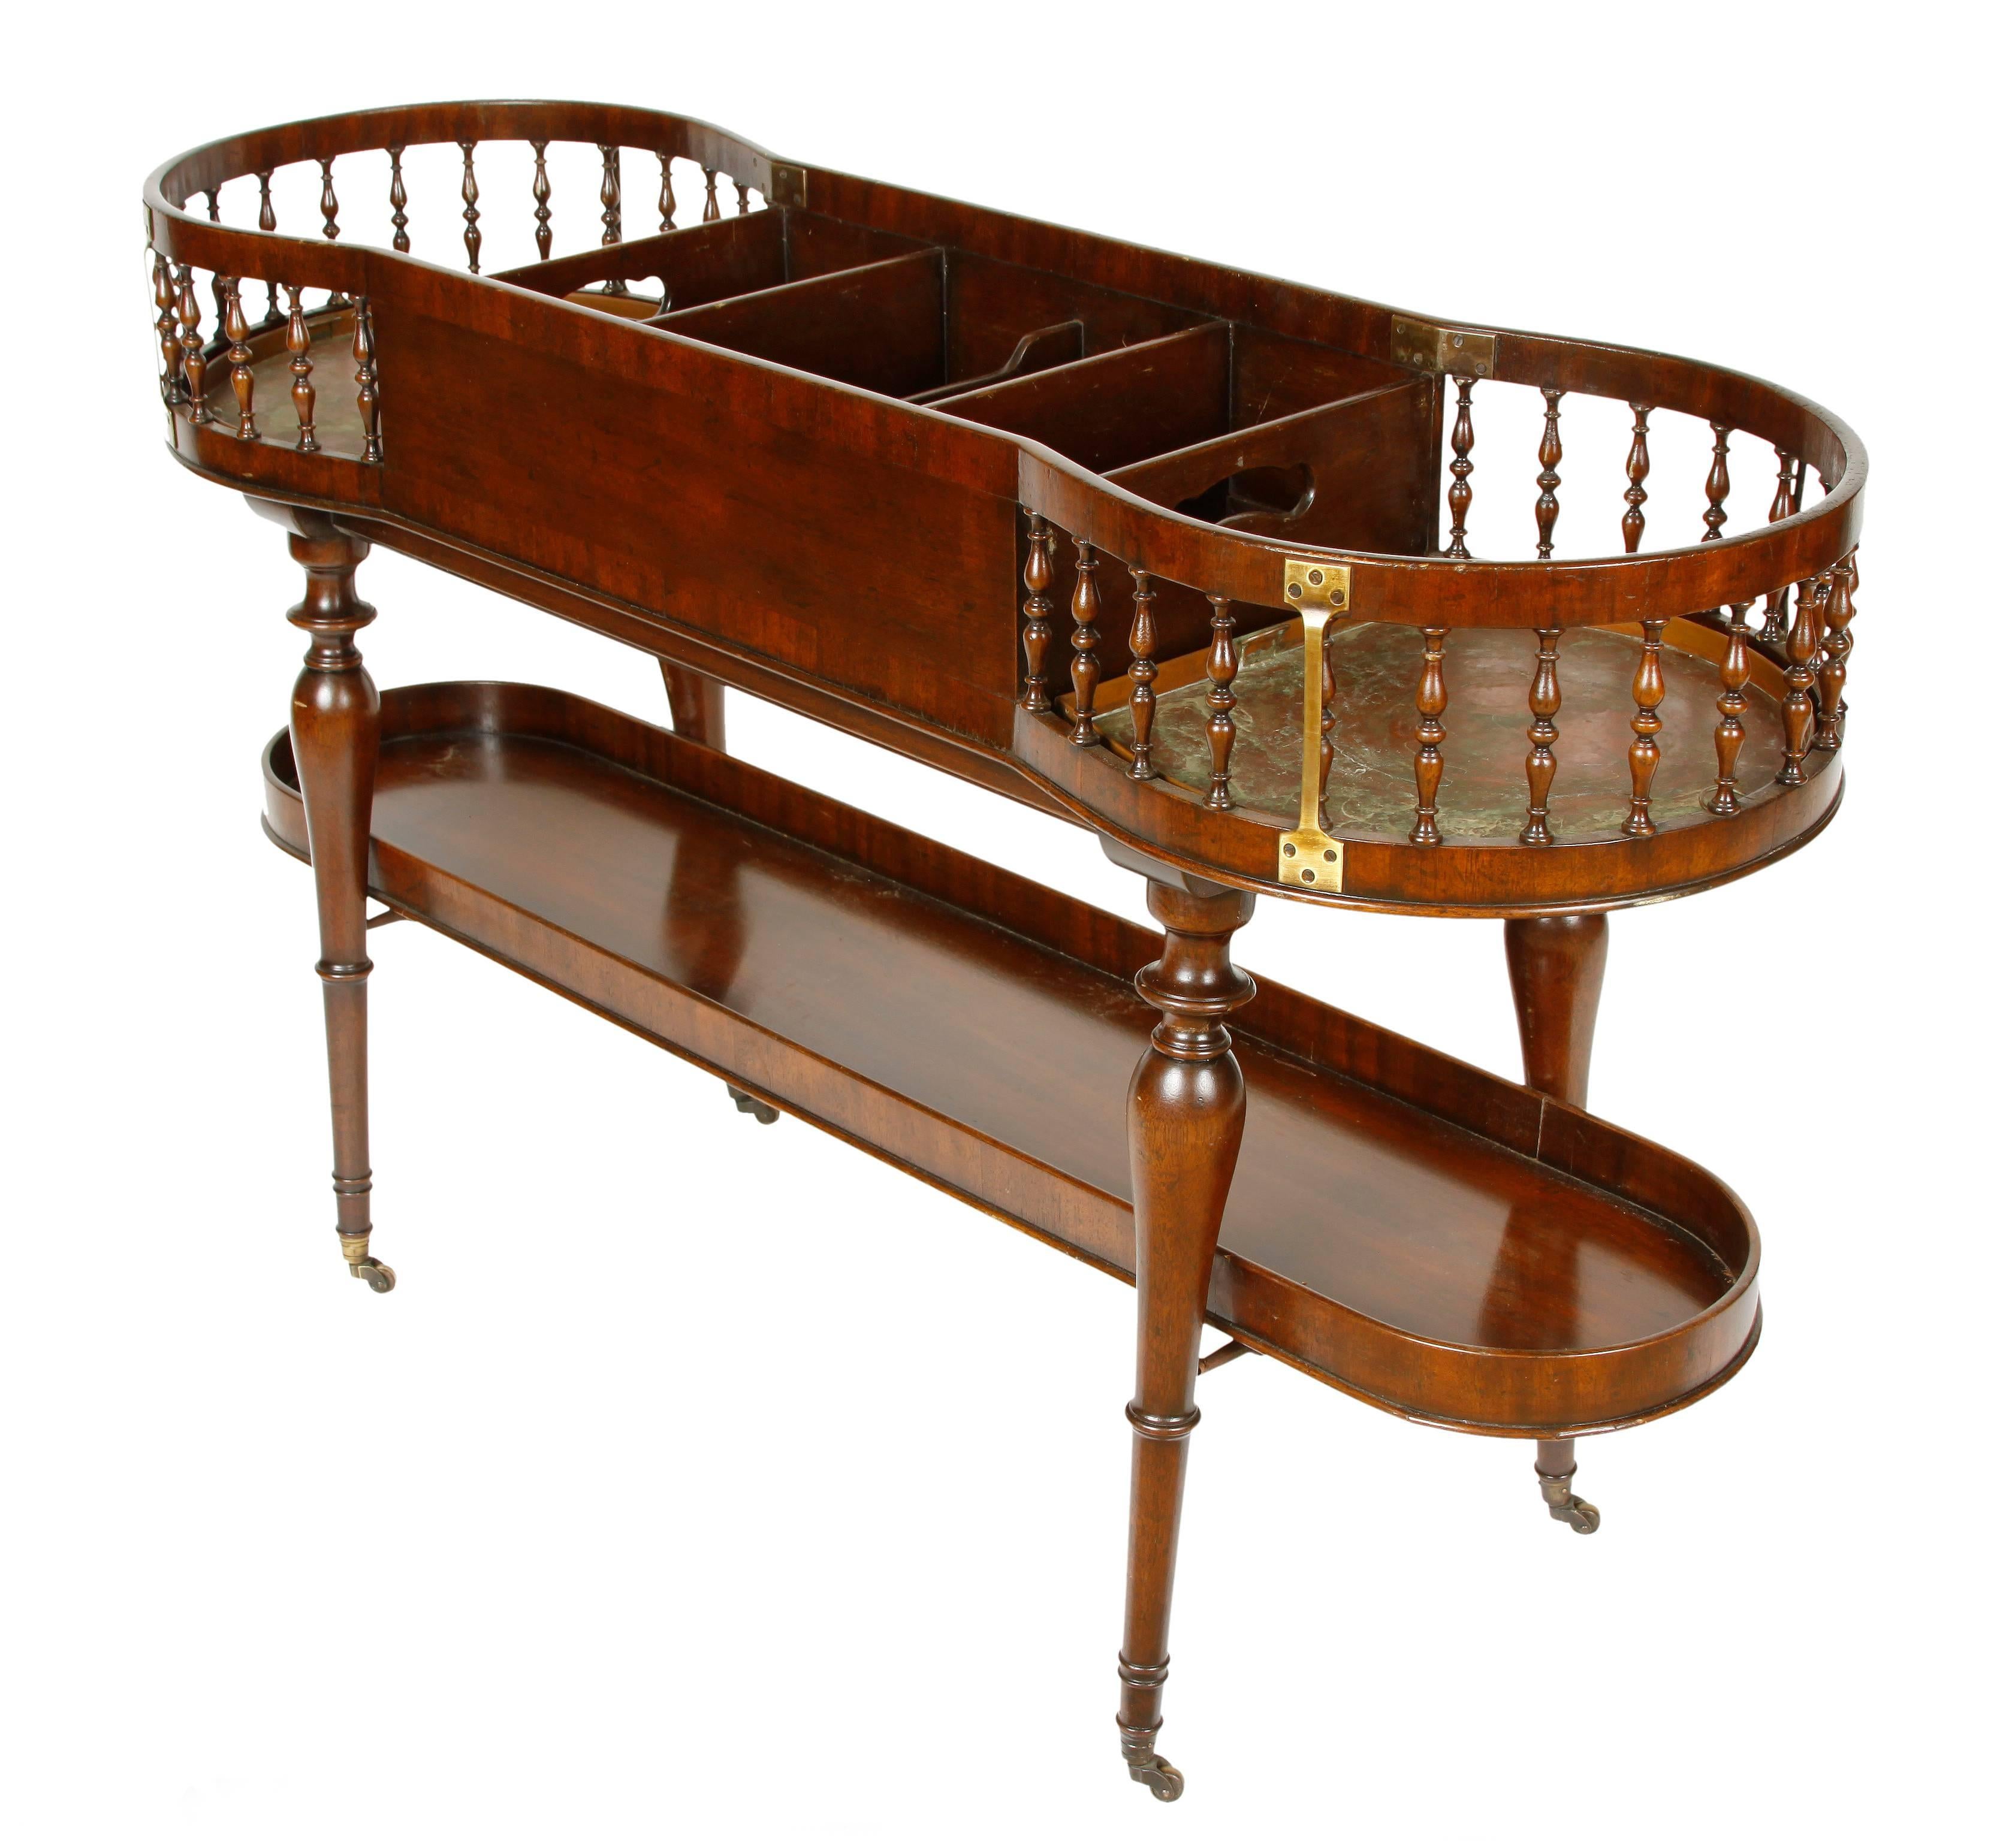 This unique English Regency bar has both form and function. Sitting atop turned legs on casters, the upper section consists of six divided spaces, all fitted with the original copper liners. The two rounded end compartments feature open sides with